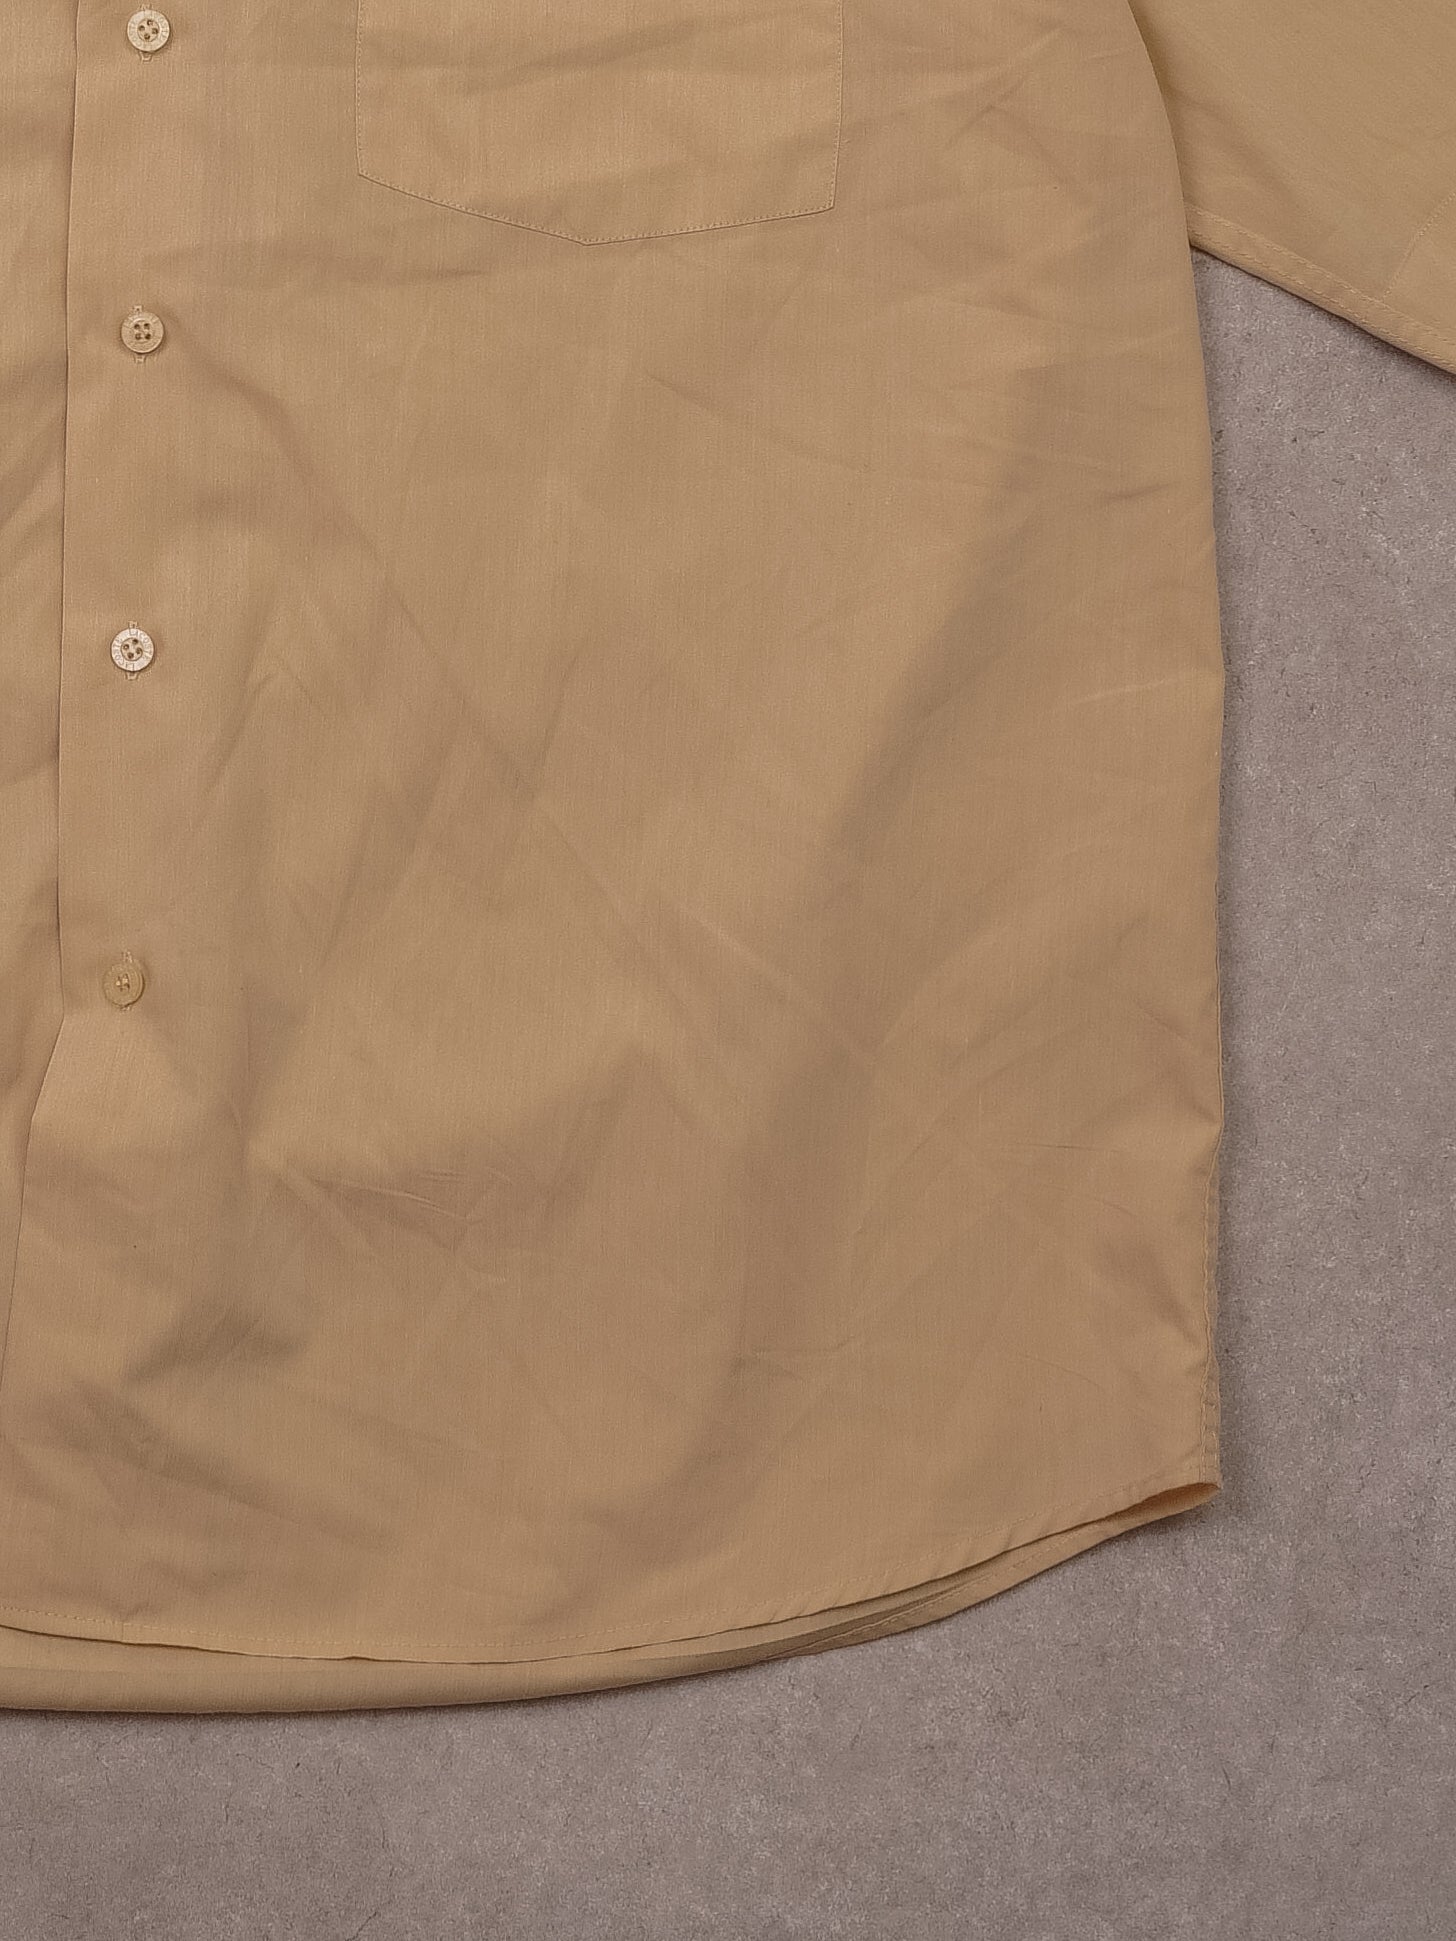 Vintage 80s Lacoste Beige Collared Short Sleeve Button Up (L)